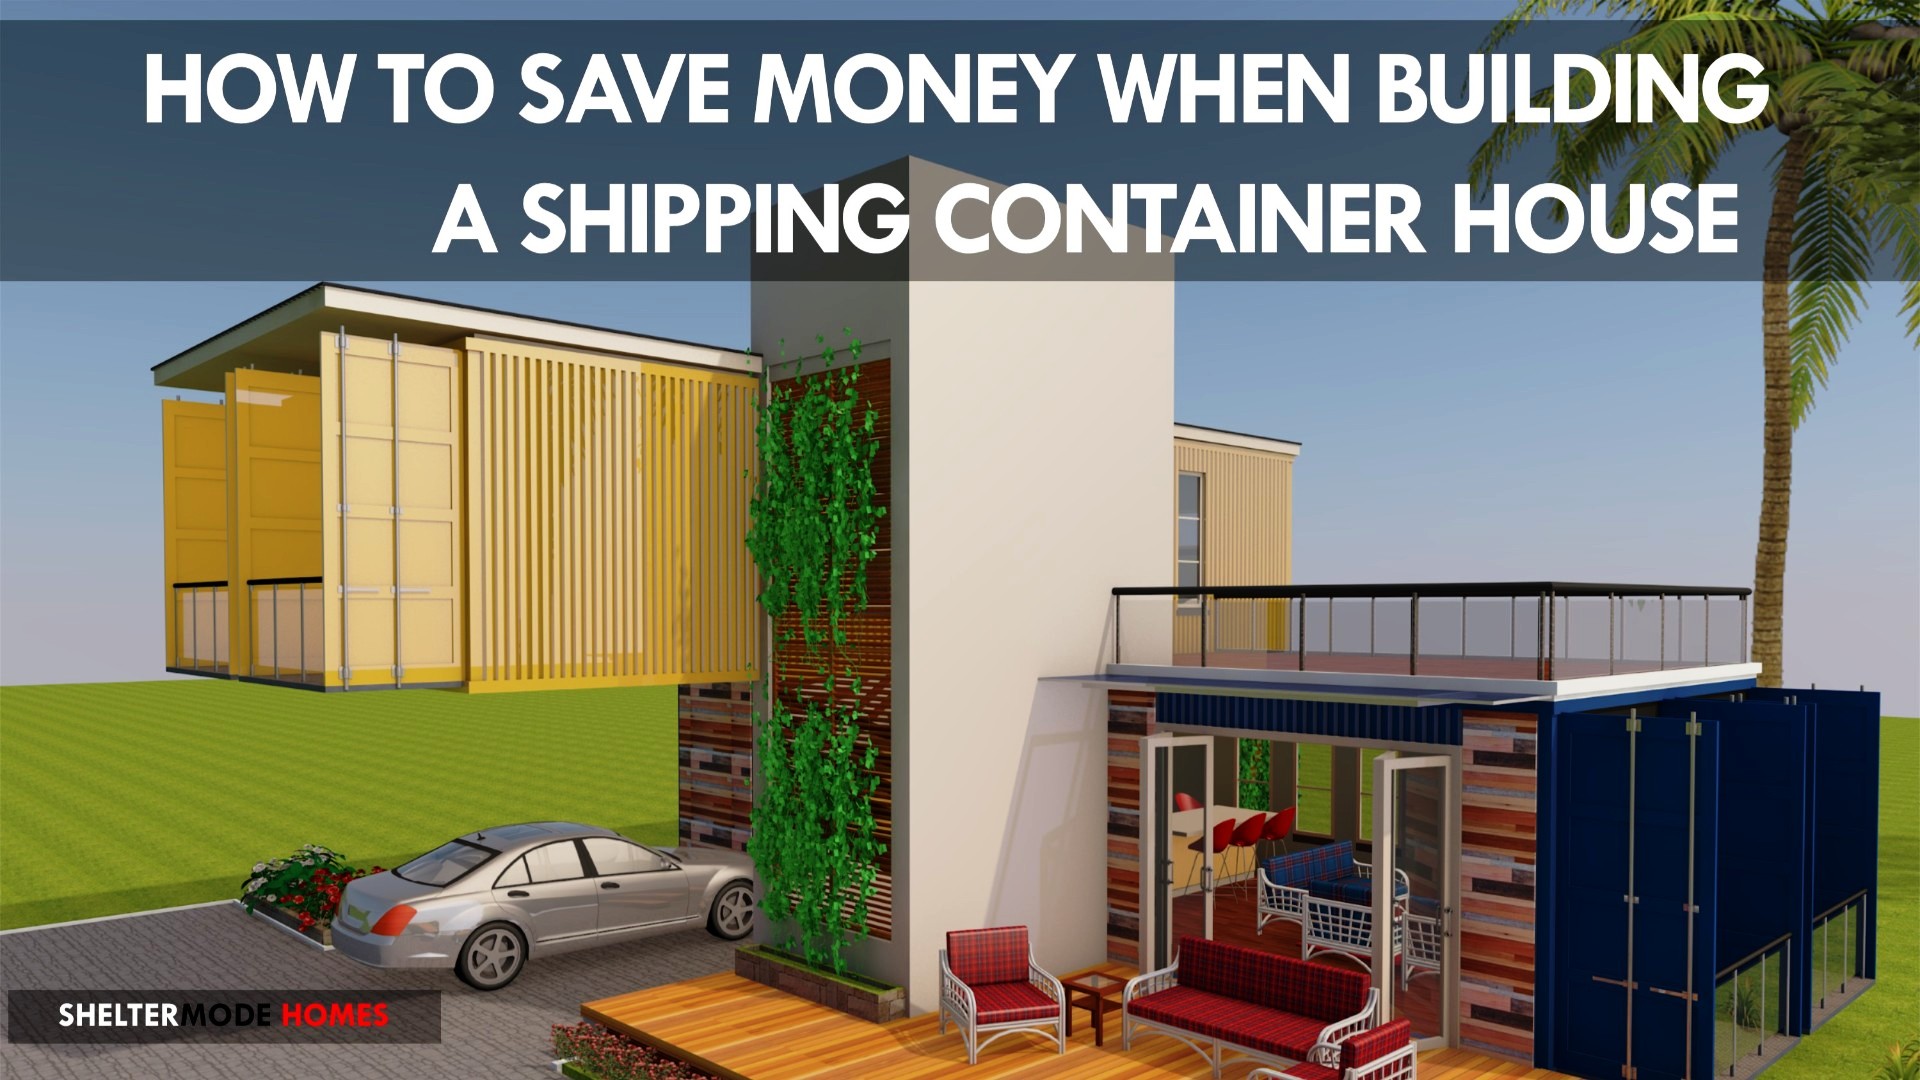 Top 10 Most Affordable Ways to Save Money When Building a Shipping Container House